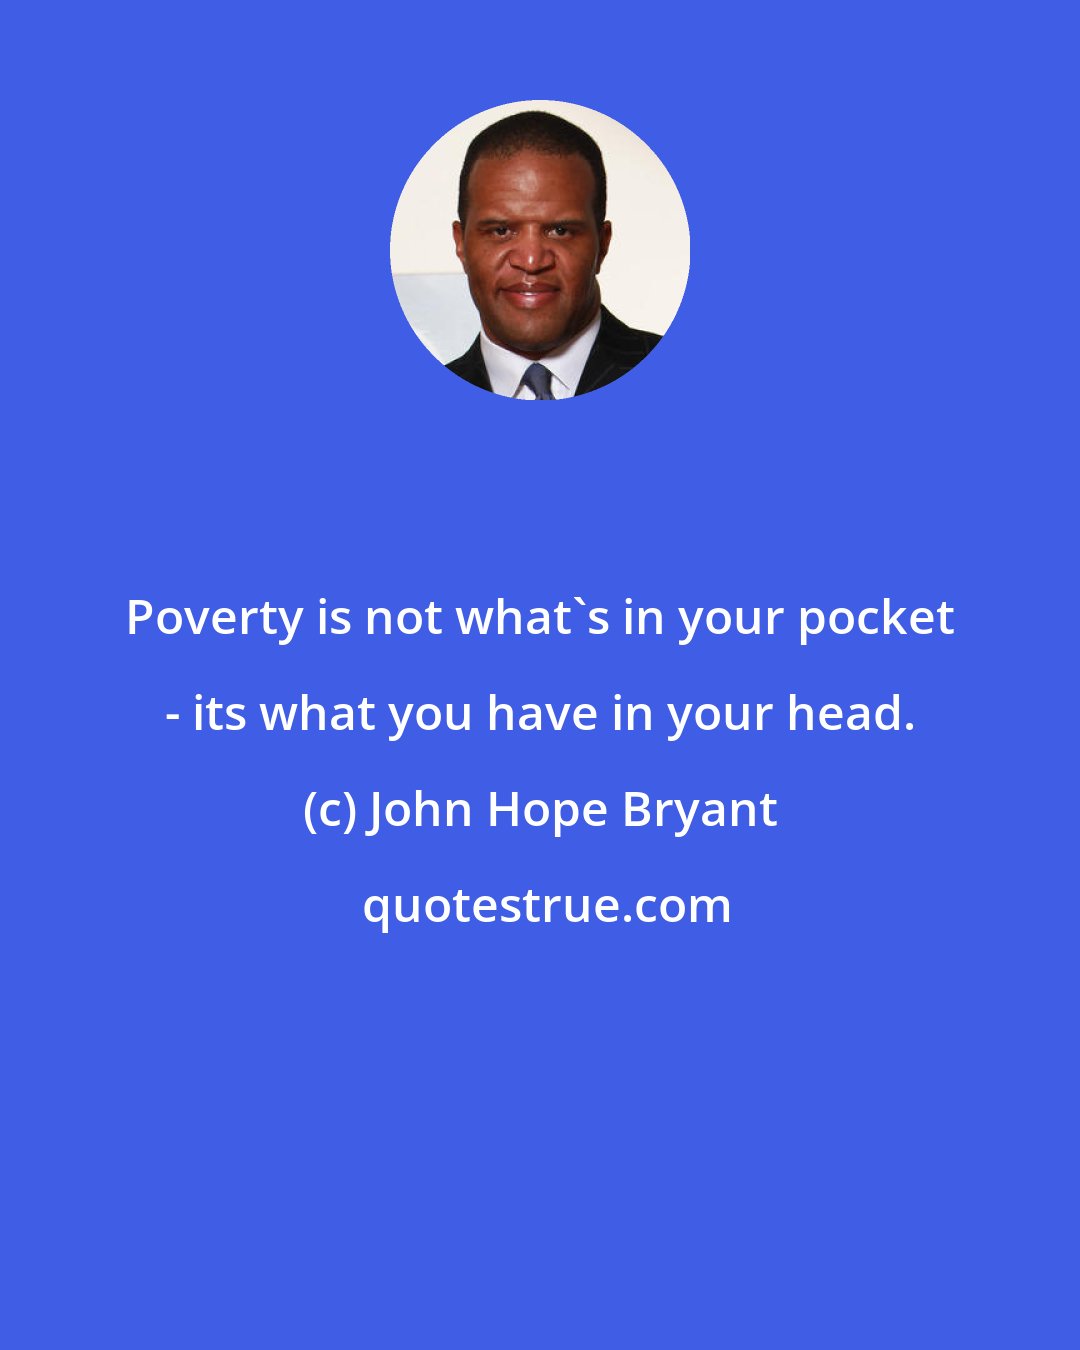 John Hope Bryant: Poverty is not what's in your pocket - its what you have in your head.